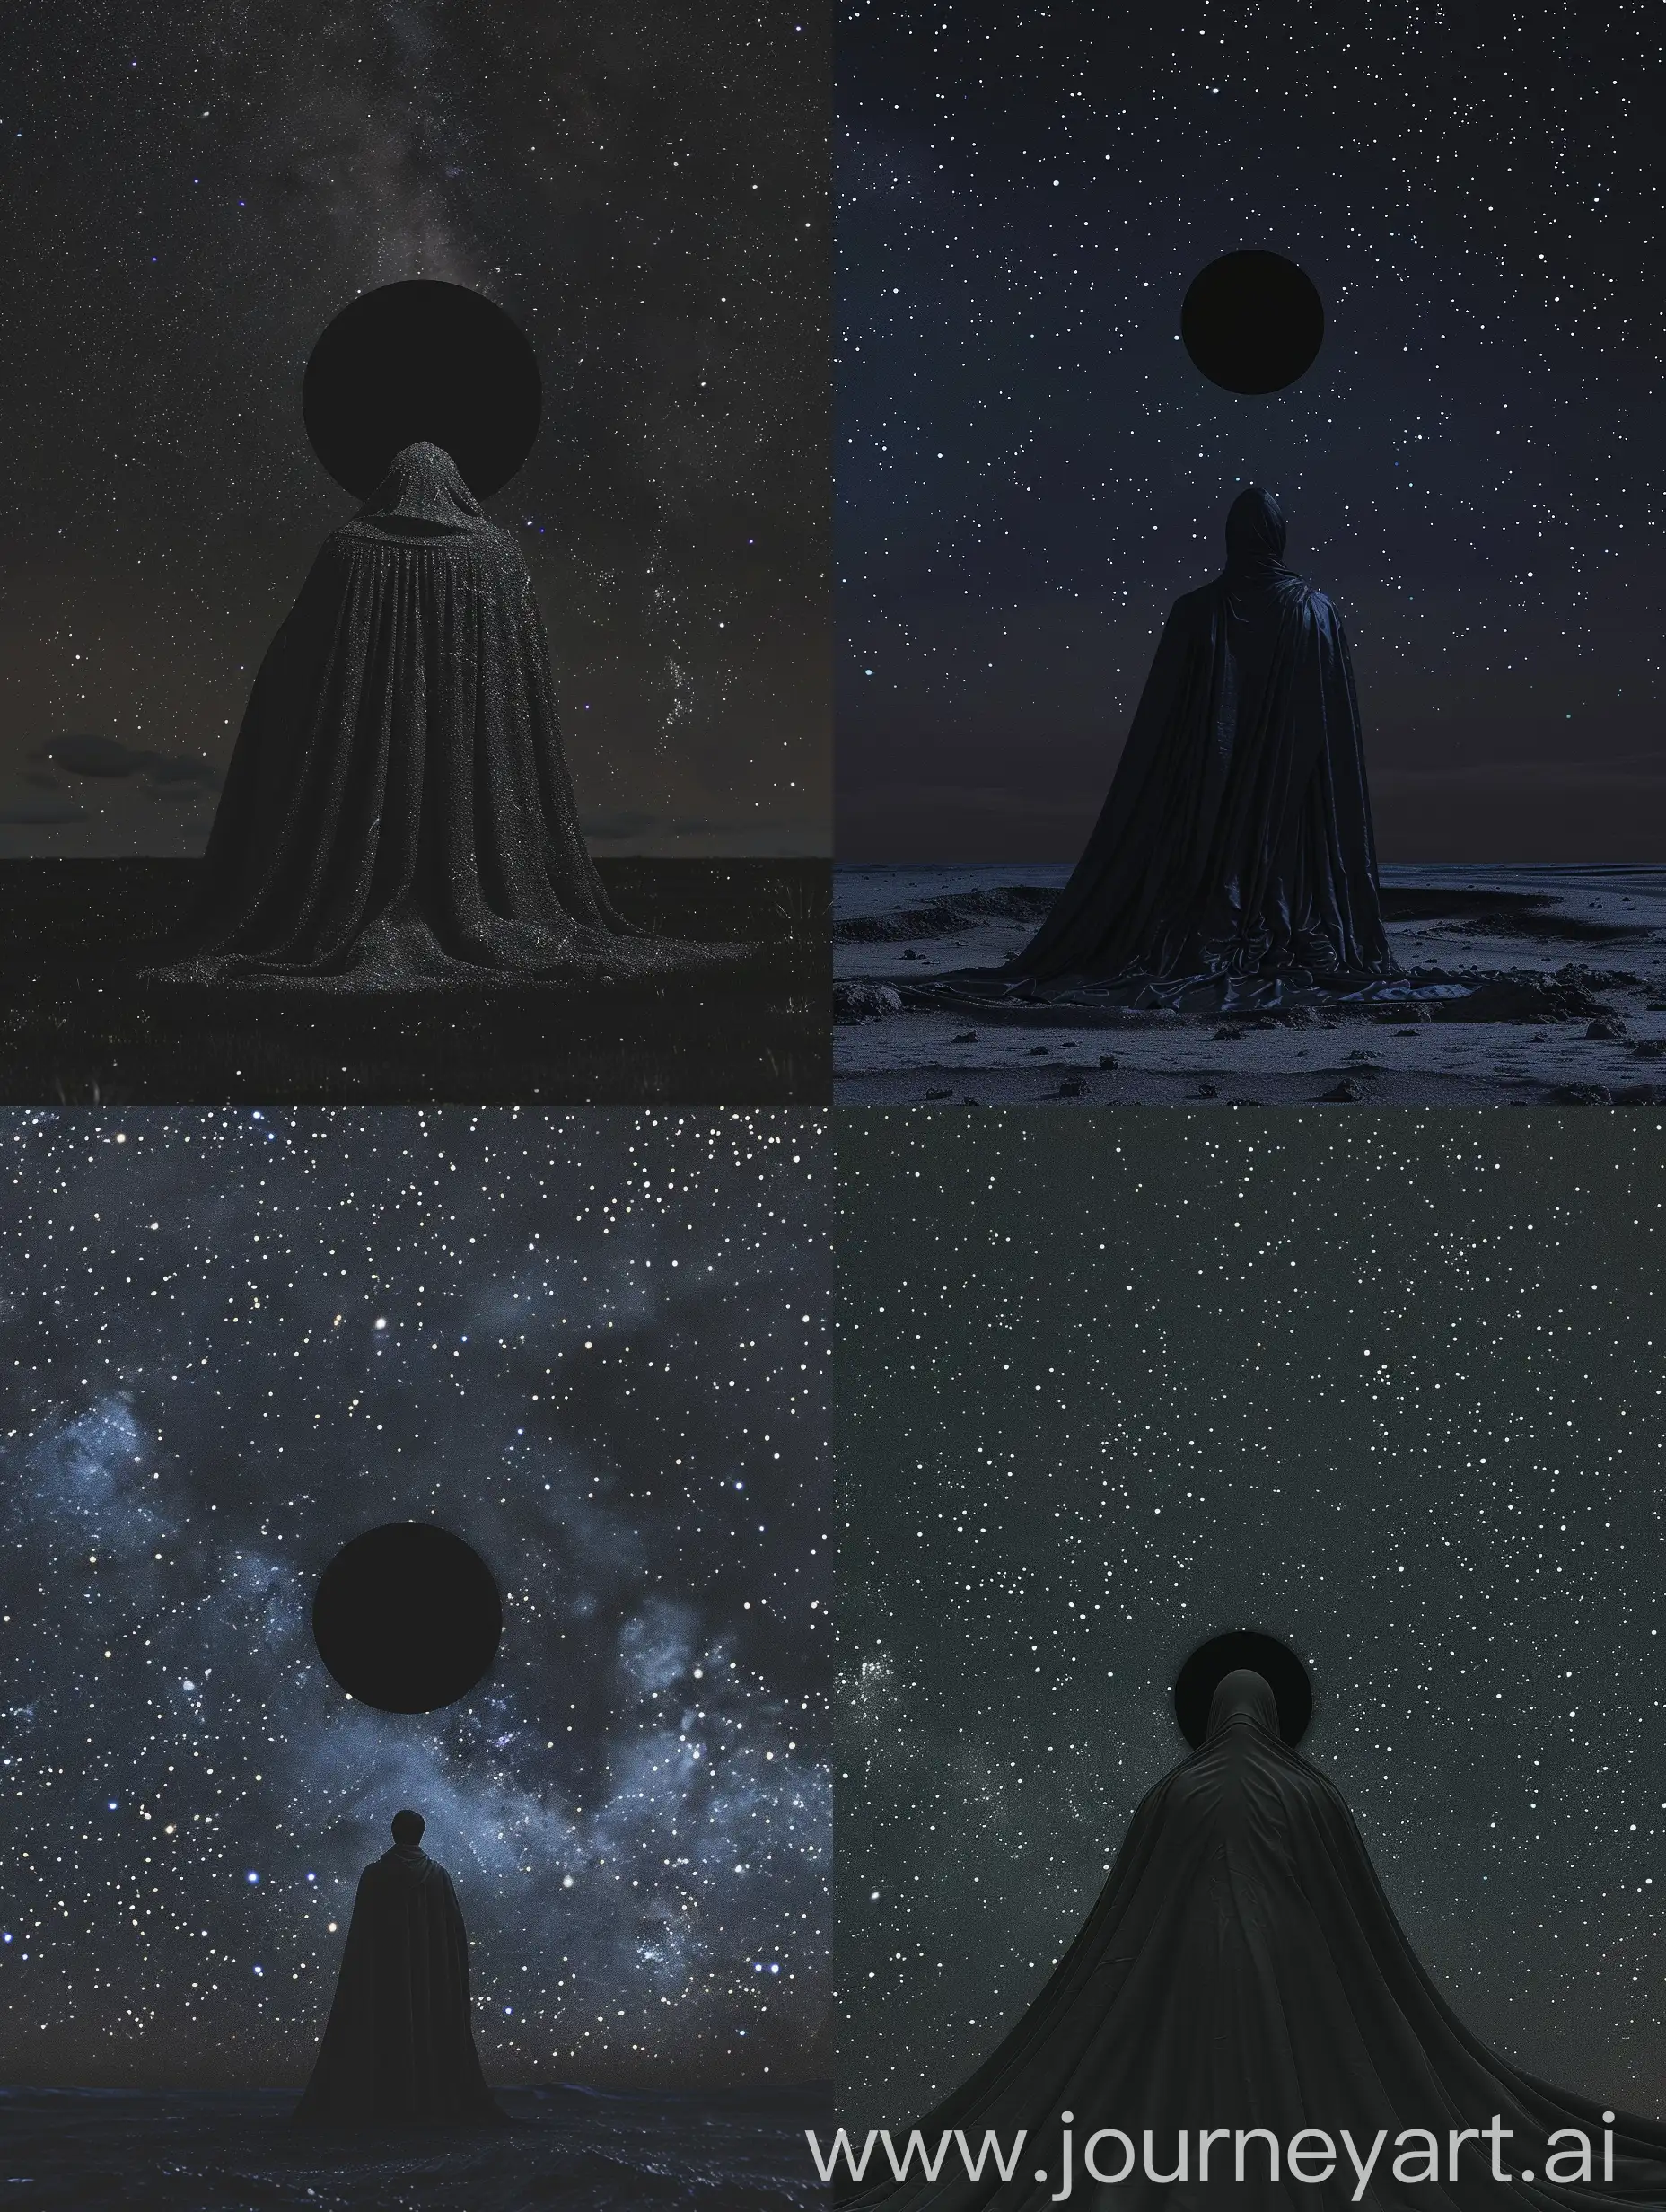 Mysterious-Cloaked-Figure-Beneath-Starry-Night-Sky